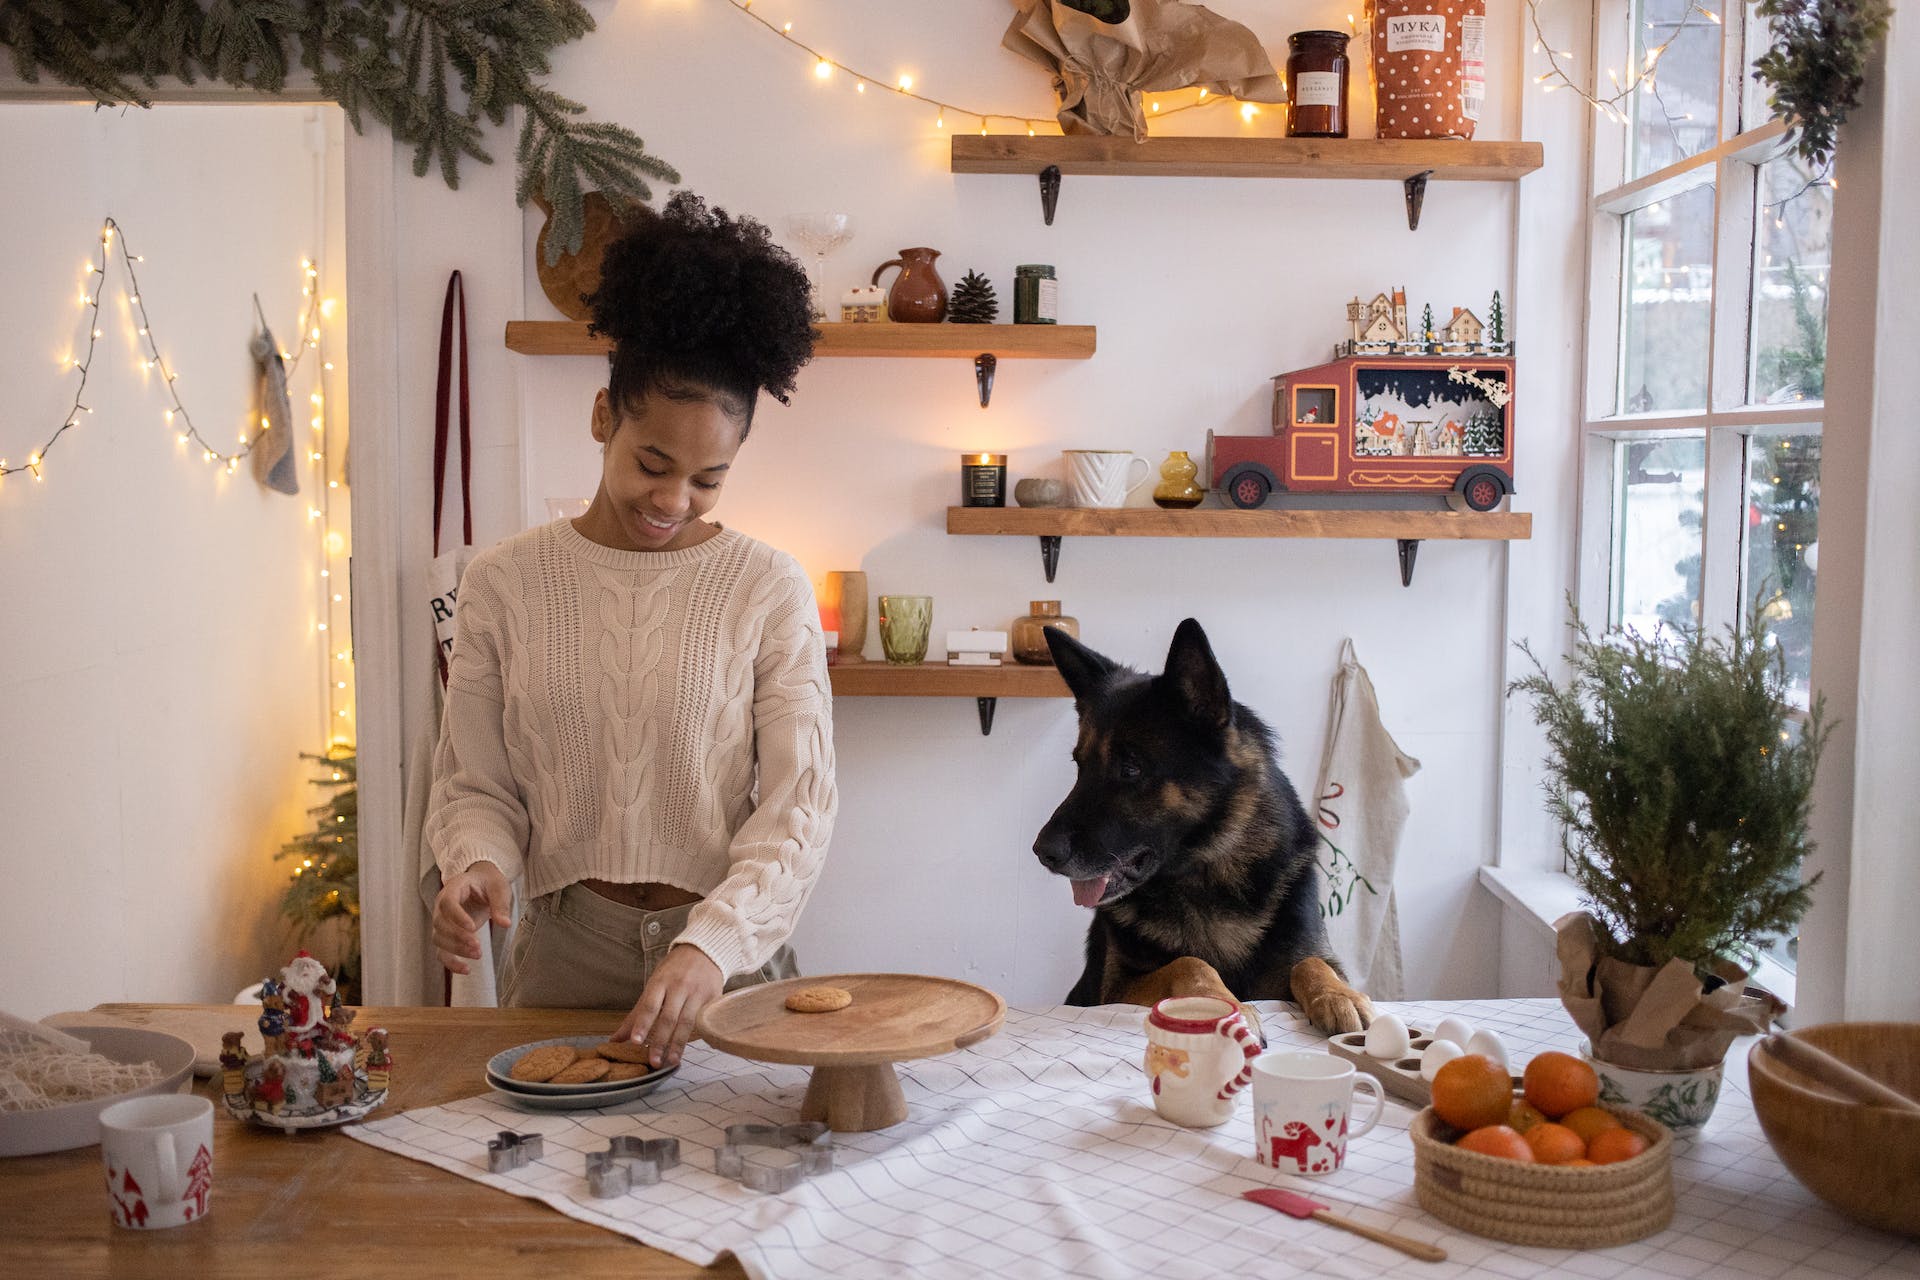 A girl placing cookies on a plate in a kitchen with her dog next to her